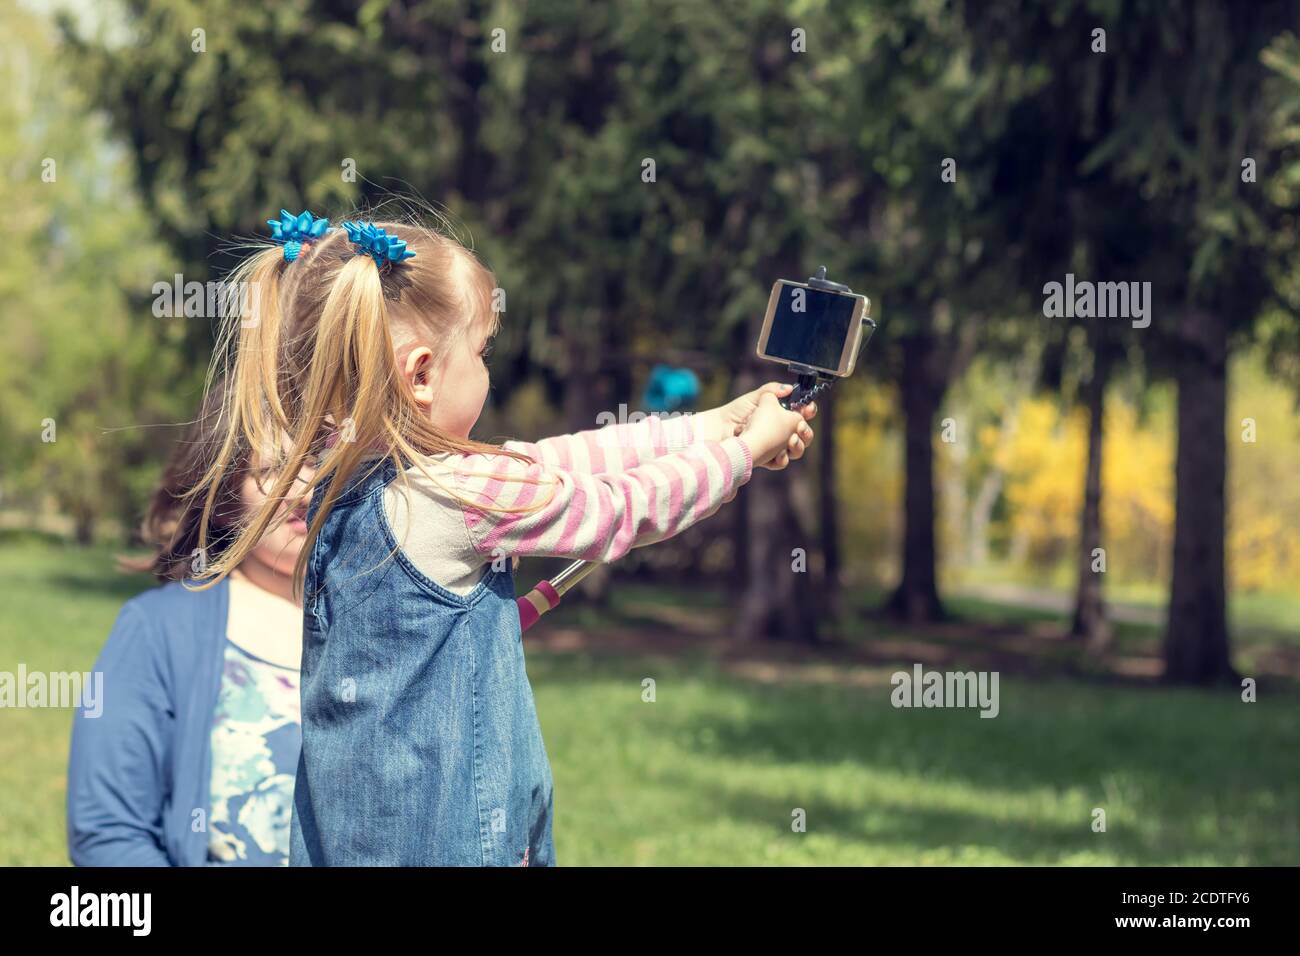 Cute little blonde girl with two ponytails taking selfie in the city park on a spring sunny day Stock Photo